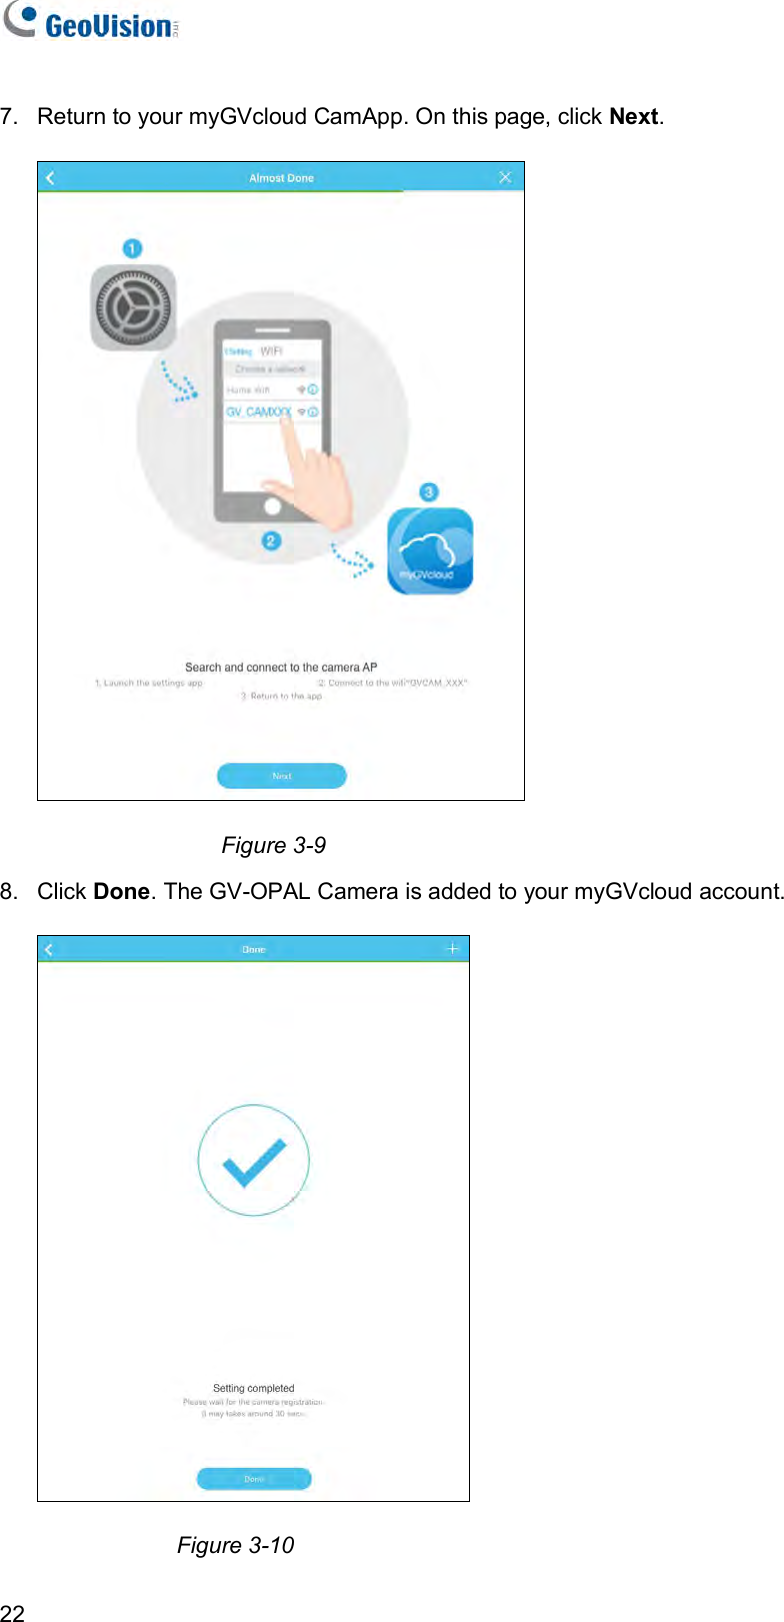   22 7.  Return to your myGVcloud CamApp. On this page, click Next.   Figure 3-9 8.  Click Done. The GV-OPAL Camera is added to your myGVcloud account.  Figure 3-10 